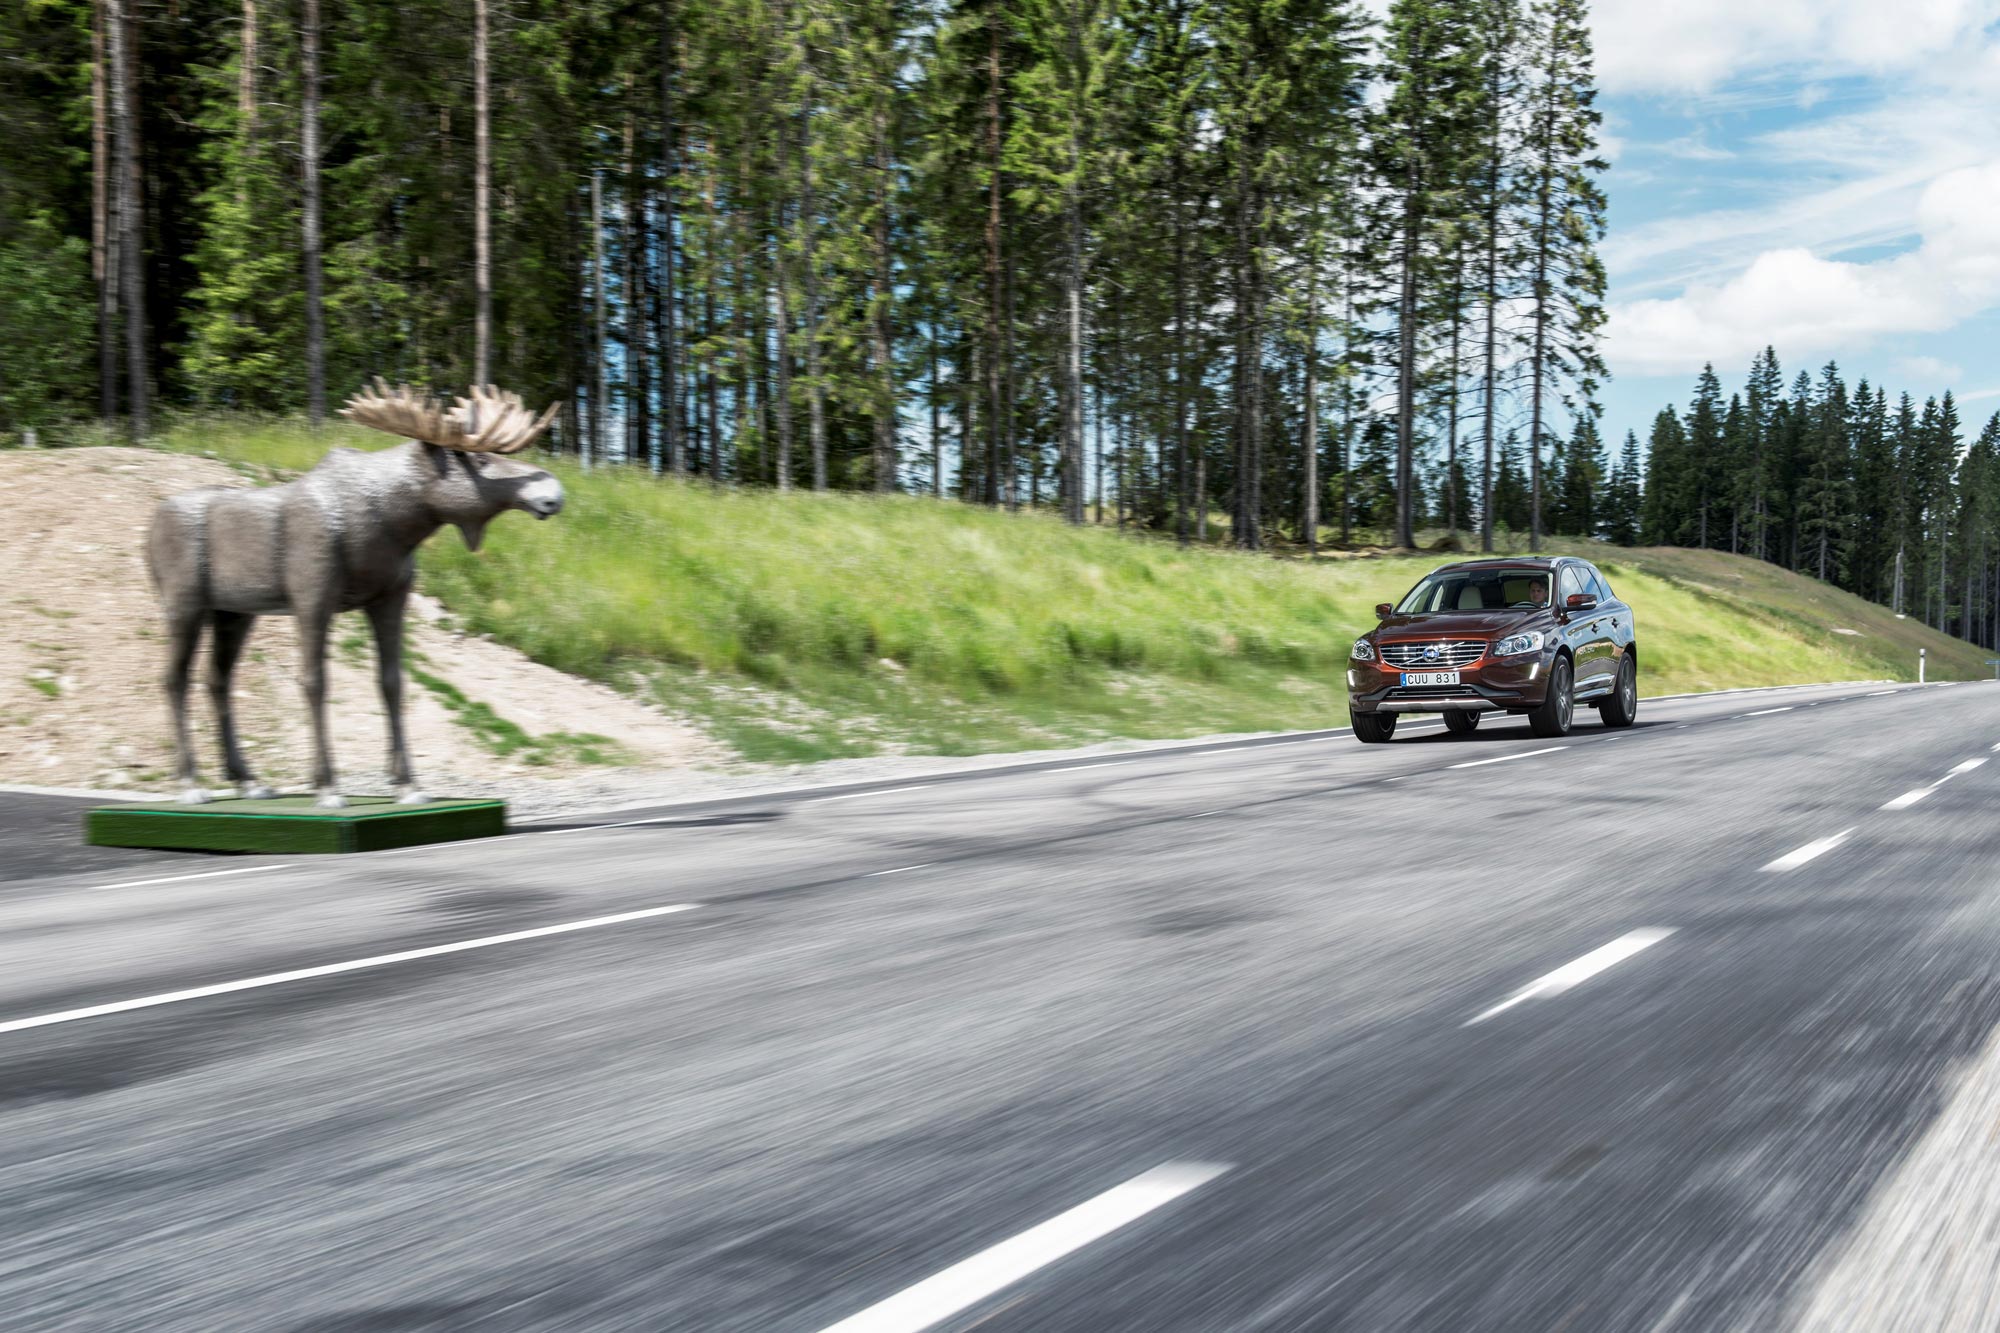 Volvo XC60 SUV drives down roadway toward model of a moose.